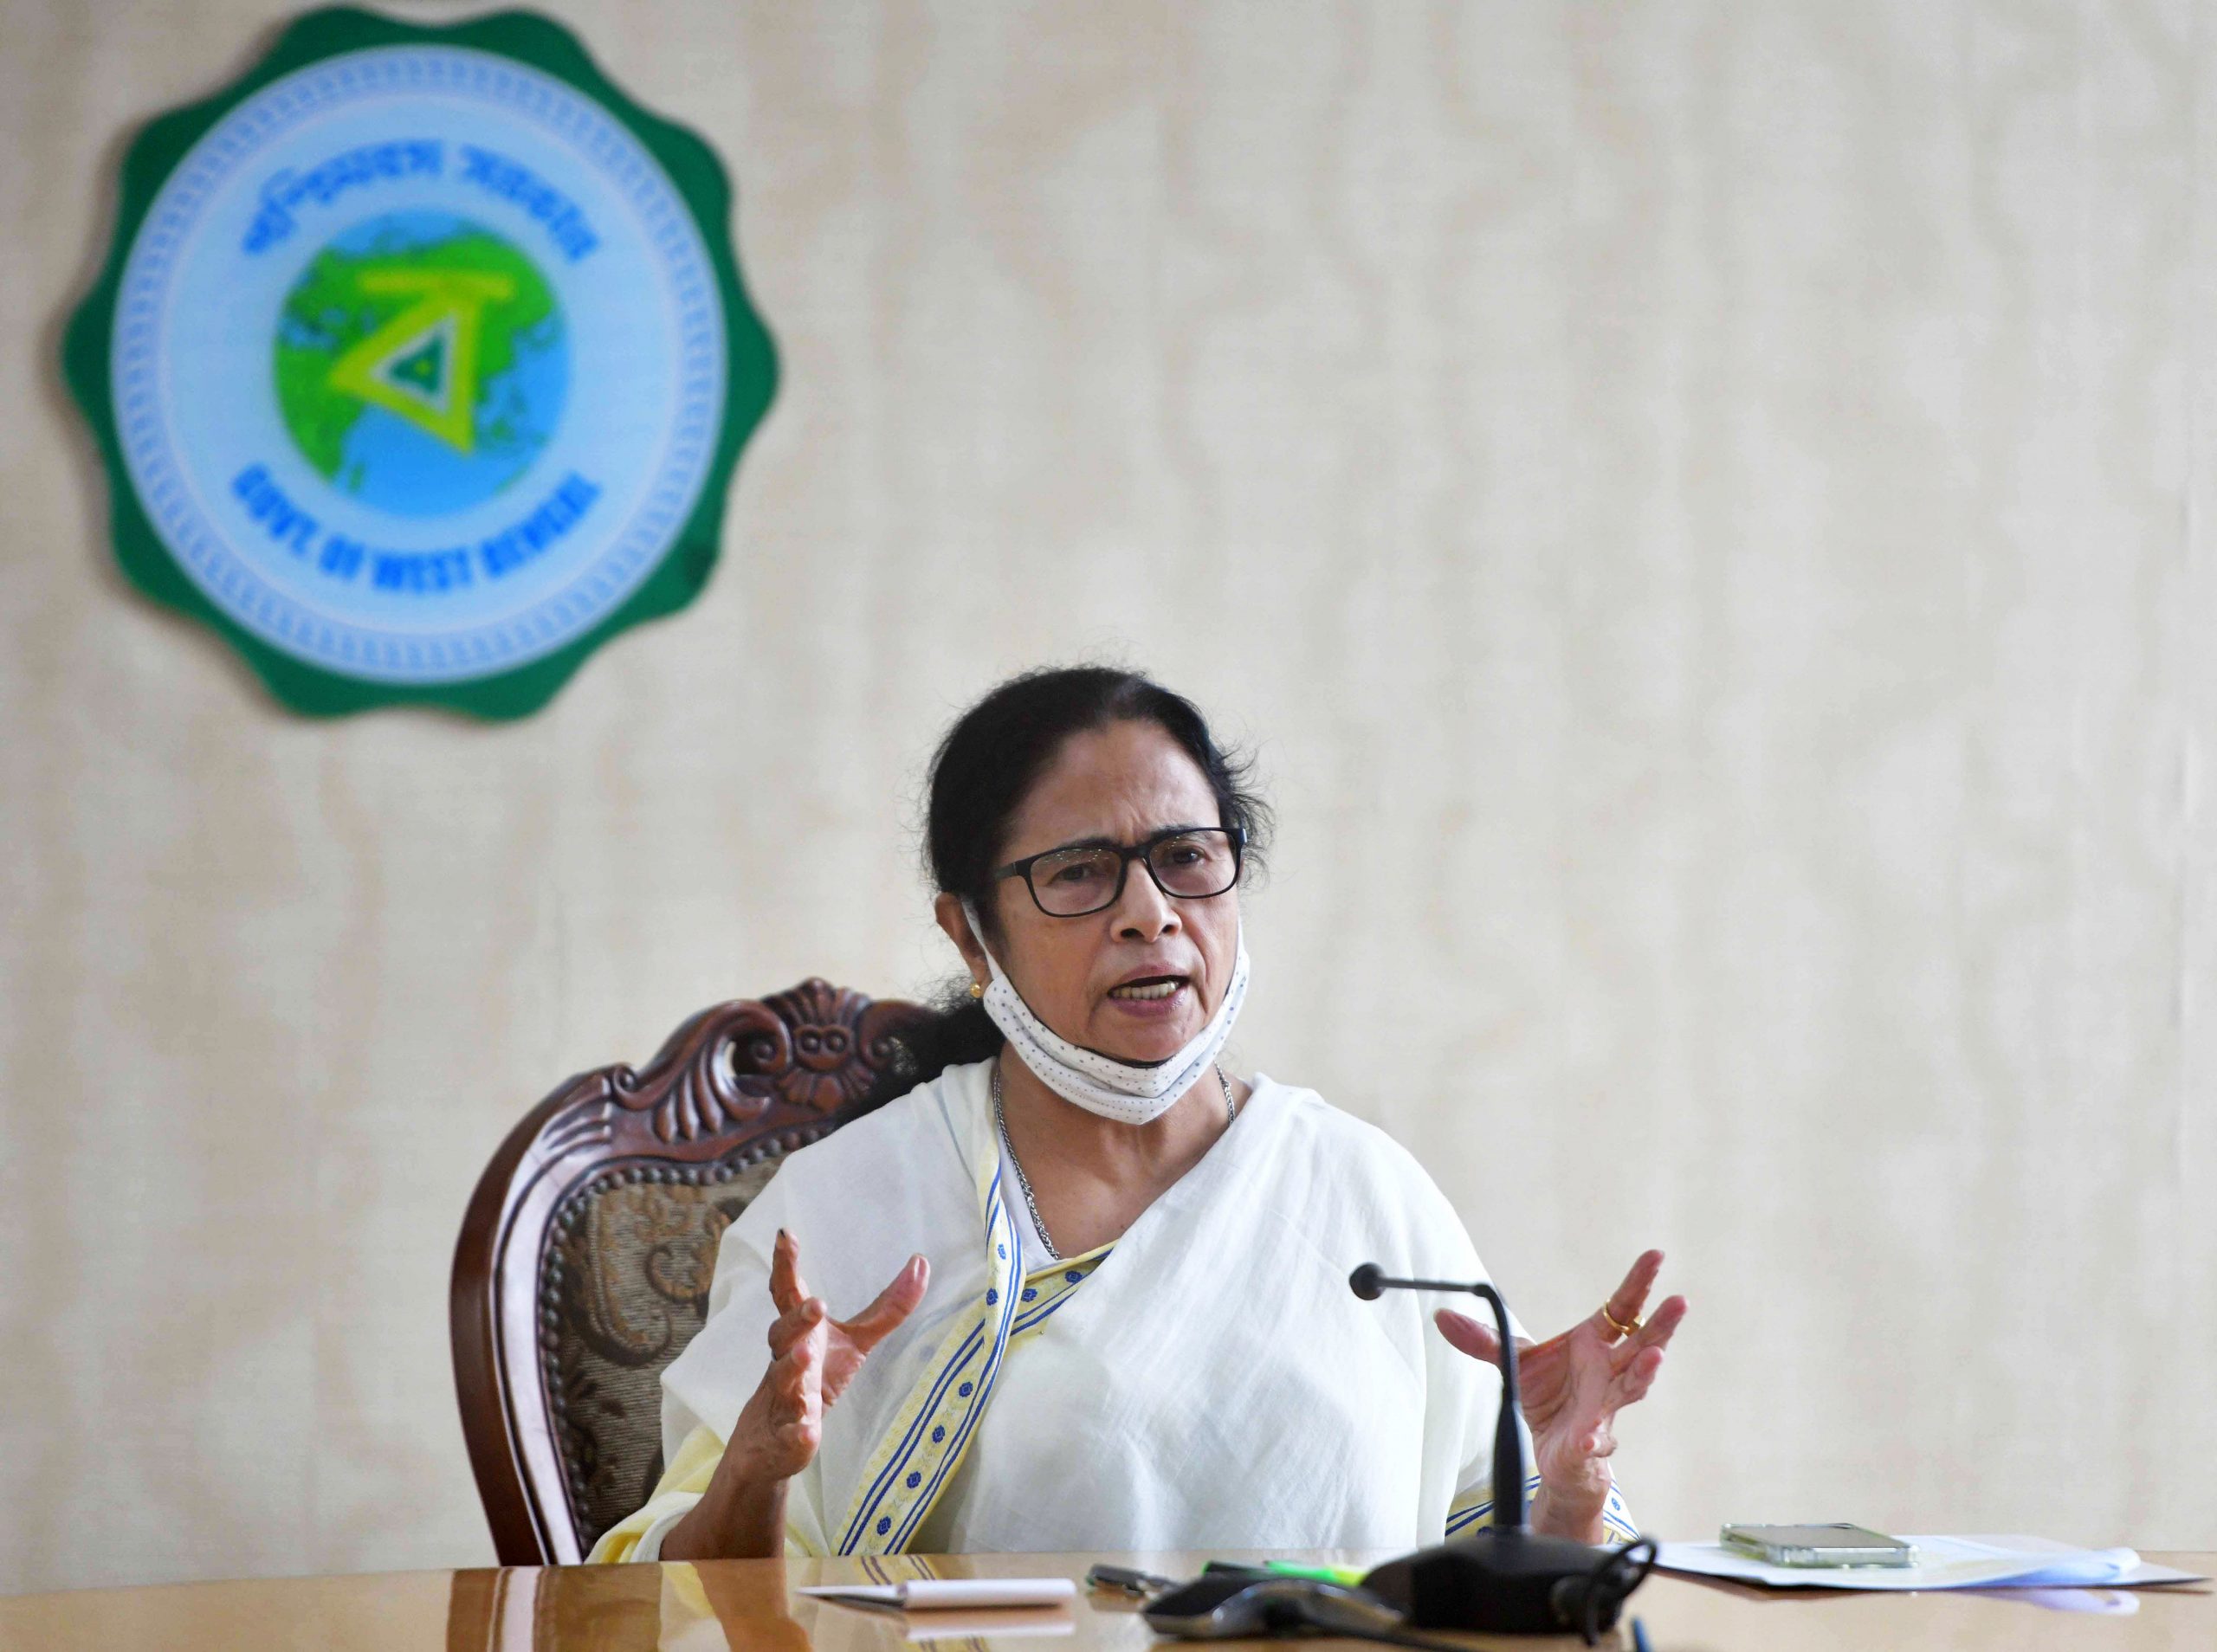 Mamata Banerjee to monitor Cyclone Yaas situation overnight from control room